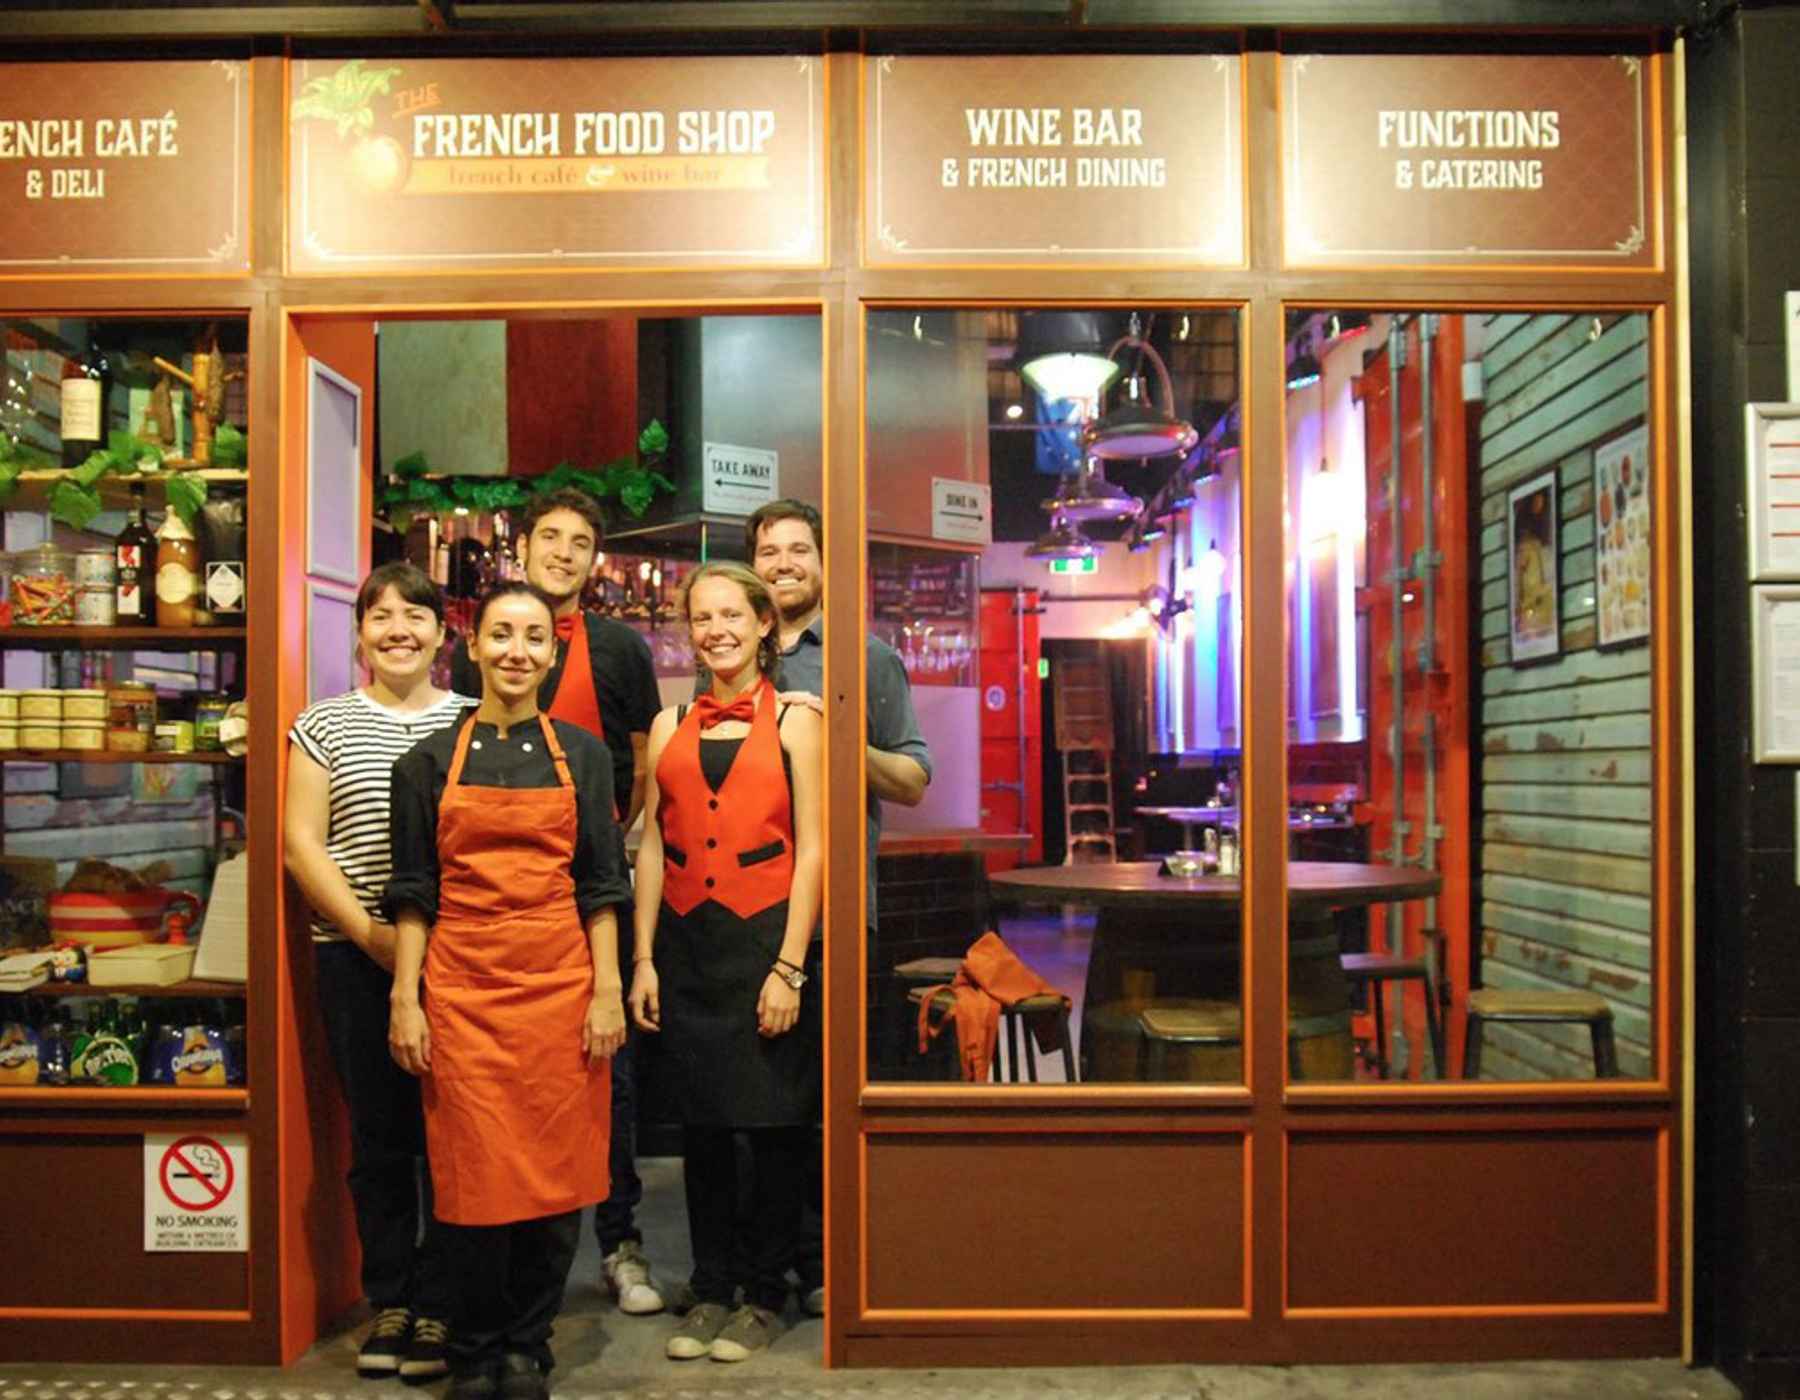 Celebrate New Year's Eve at The French Food Shop